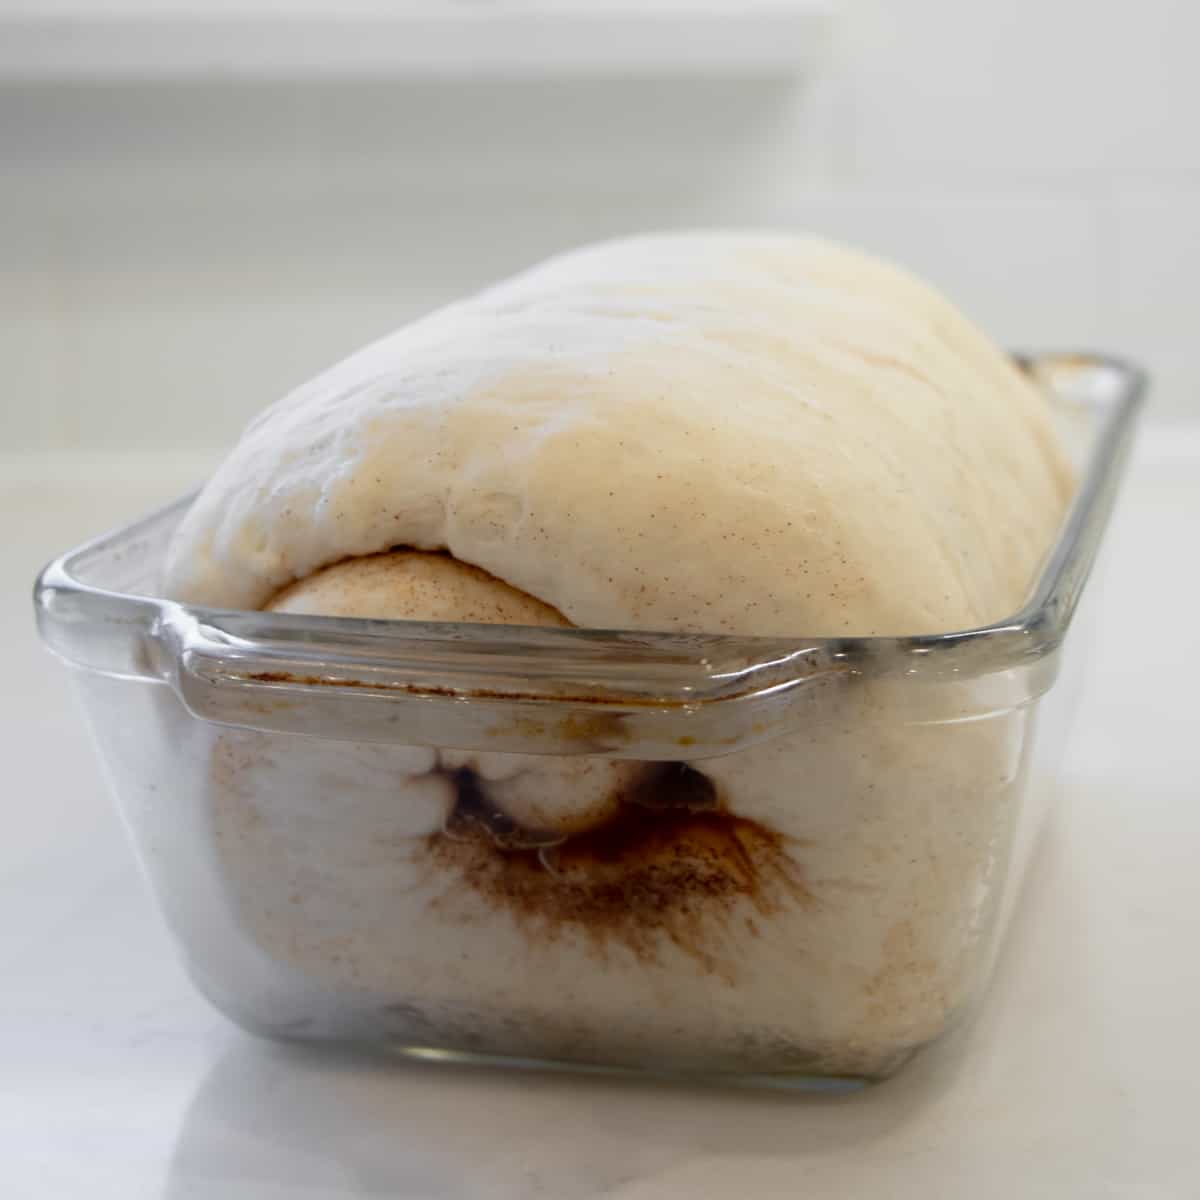 Dough in a loaf pan after it has finished rising.